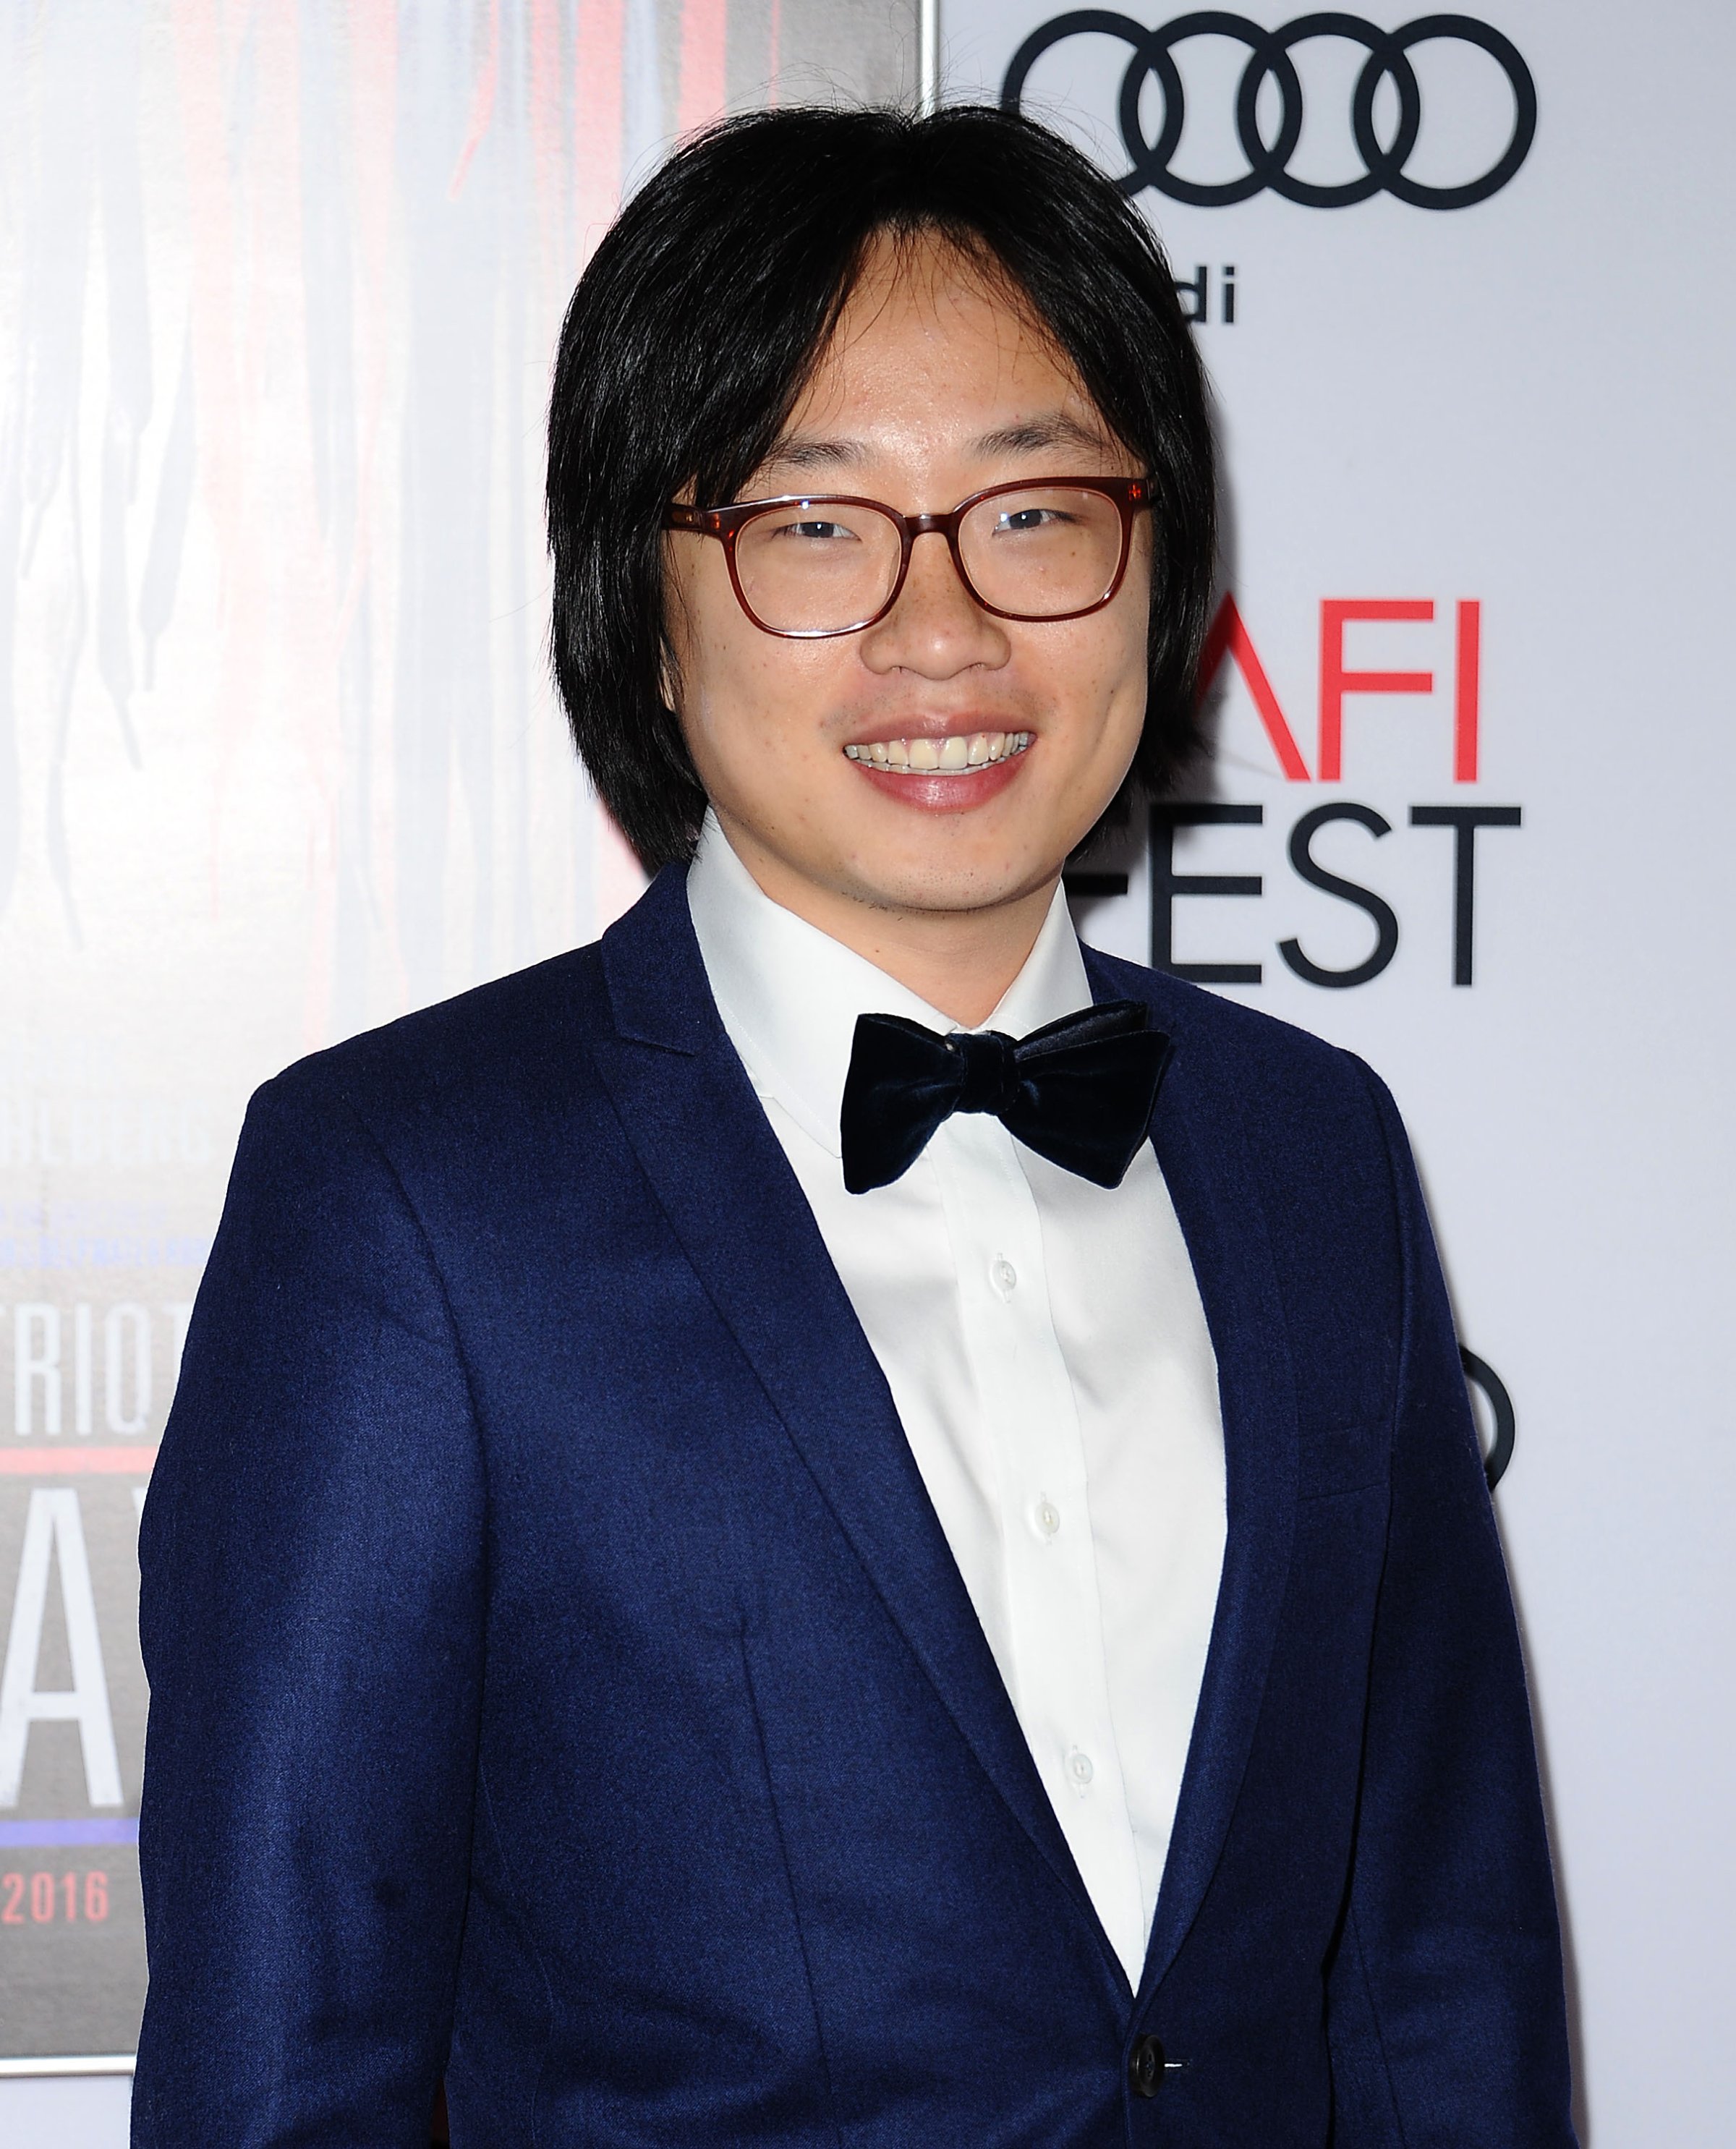 Jimmy O. Yang attends a screening of "Patriots Day" on November 17, 2016 in Hollywood, California.